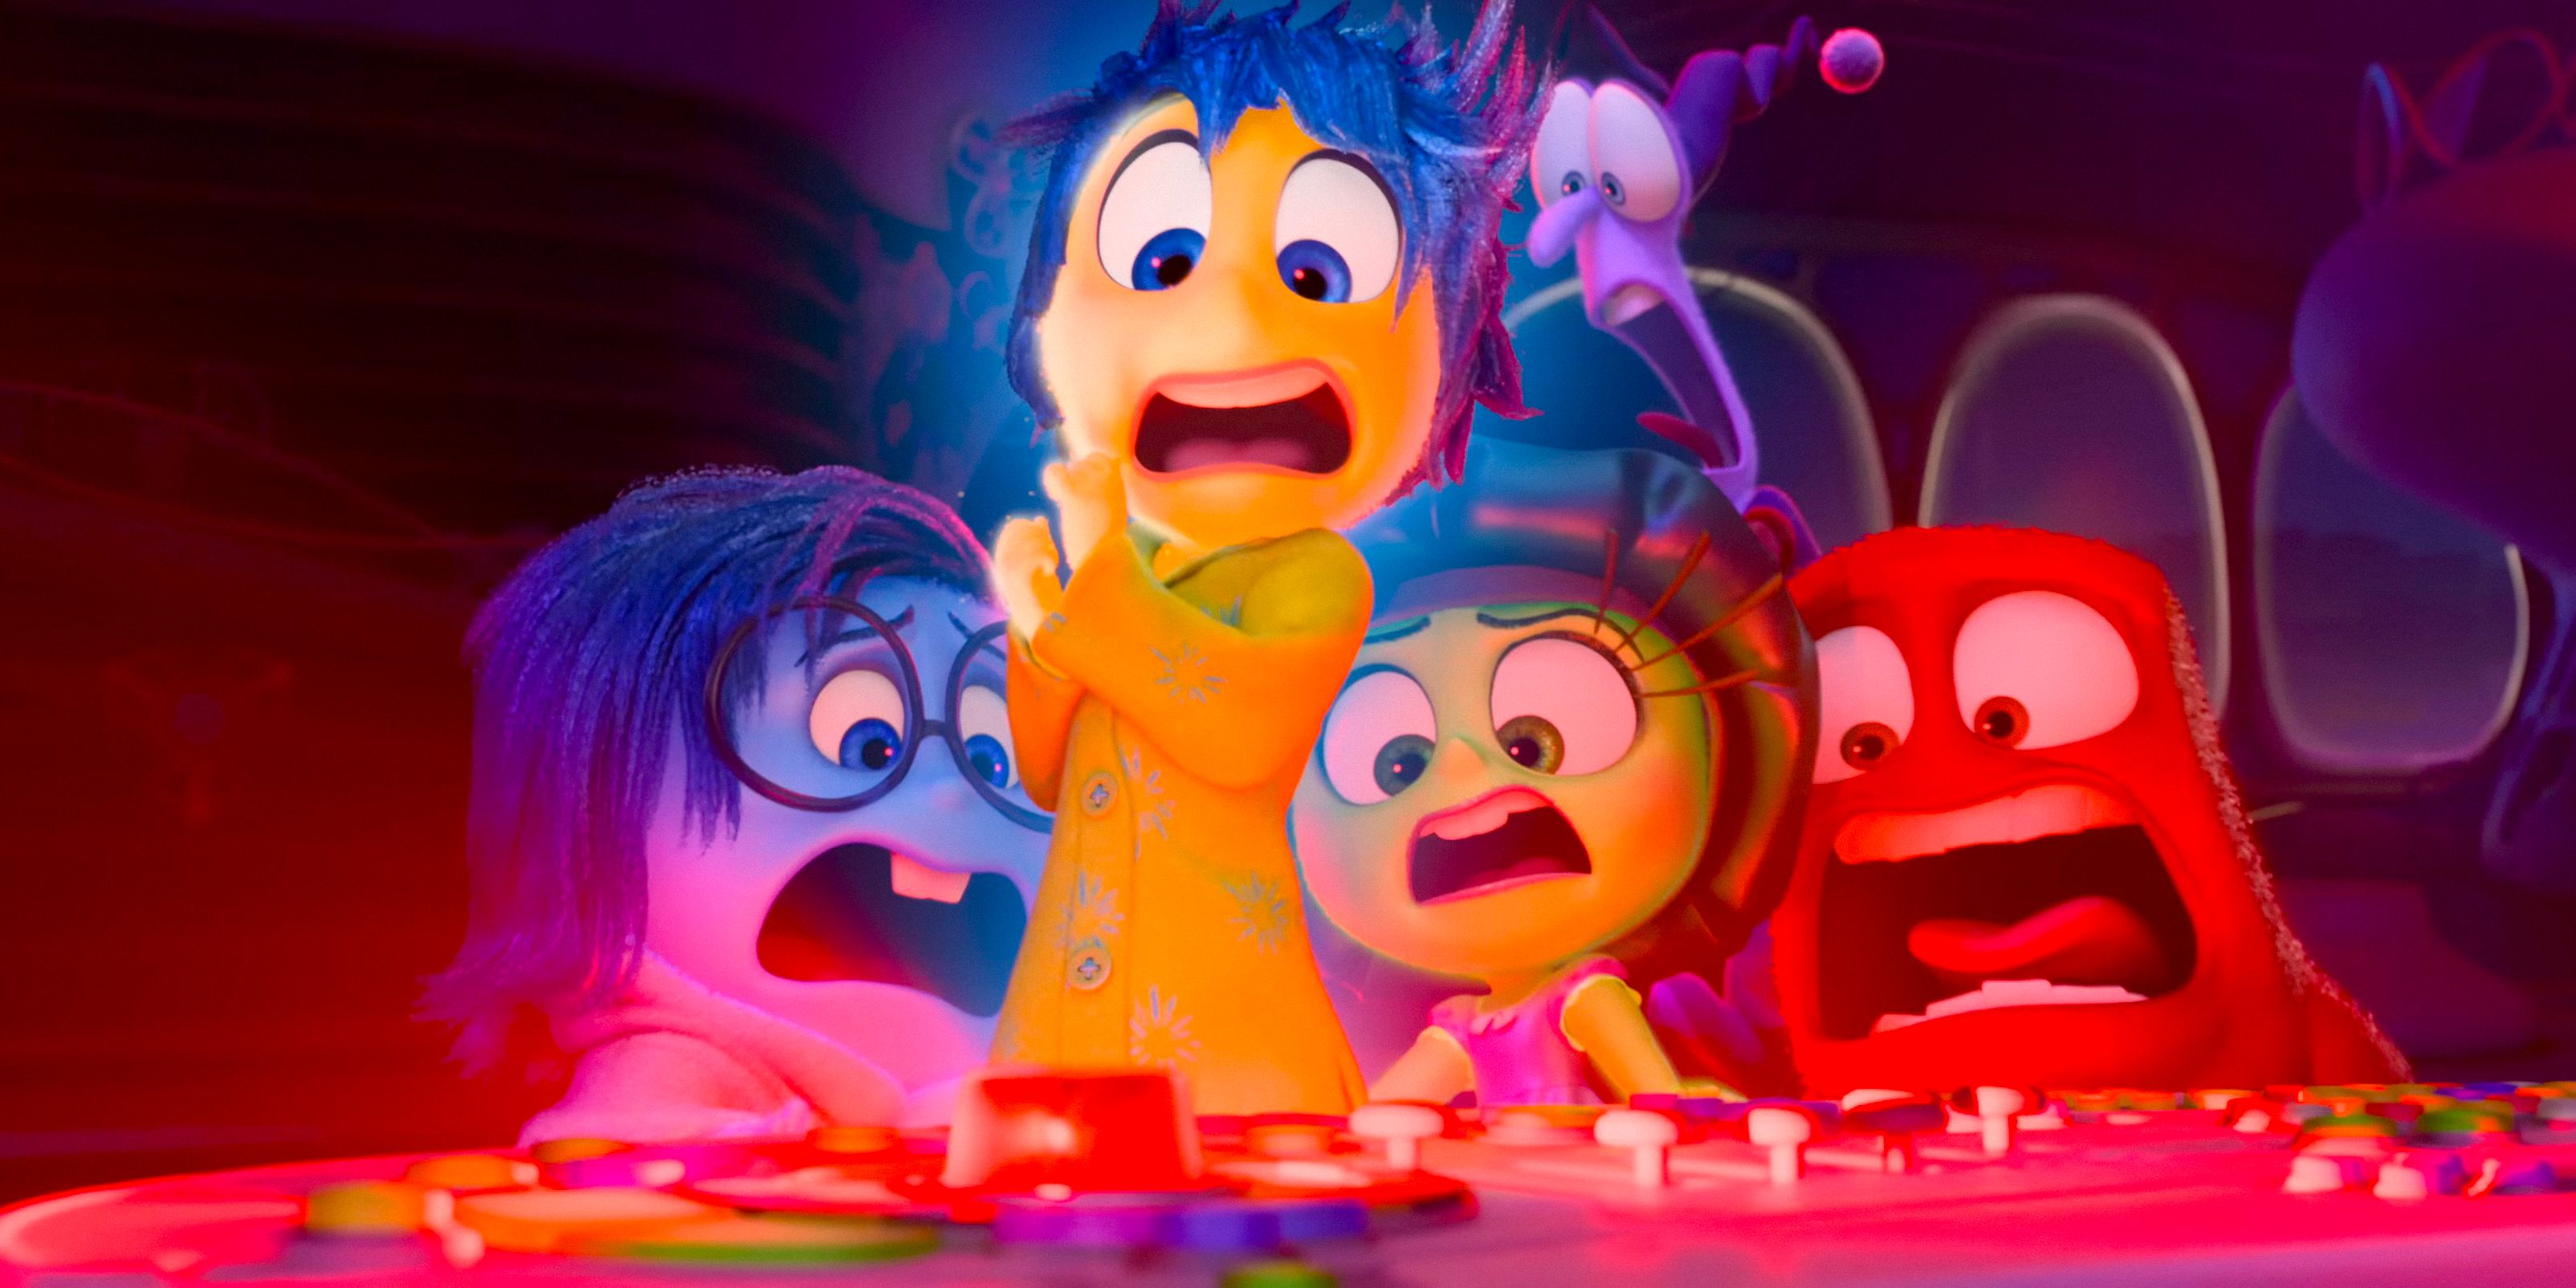 Sadness,Joy, Disgust, Fear, and Anger scared upon seeing an alert light on the control panel in Inside Out 2